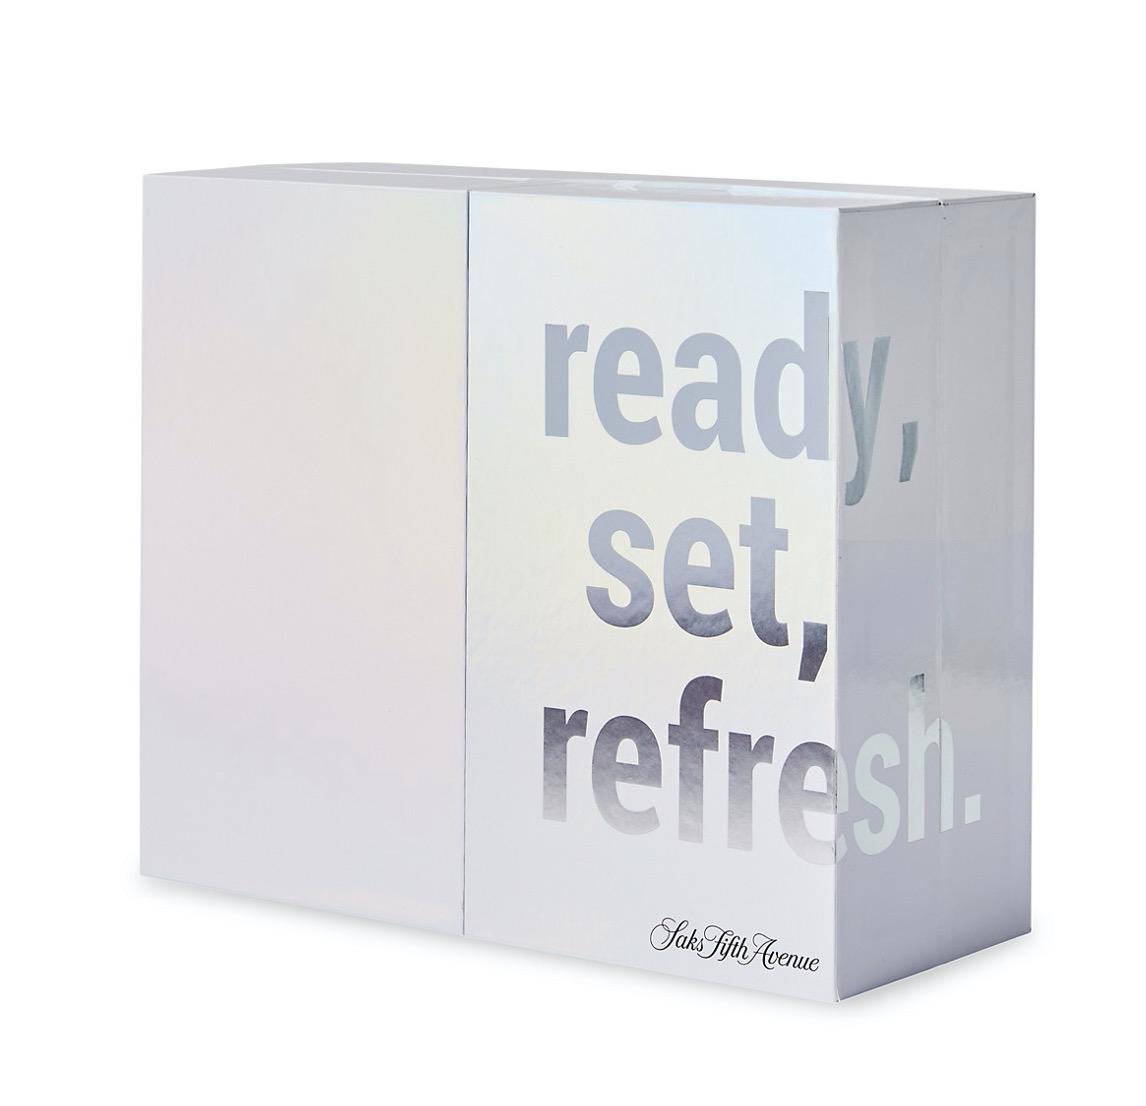 Saks Fifth Avenue Ready, Set, Refresh! 14-Piece Advent Calendar – Marked Down to $63.75